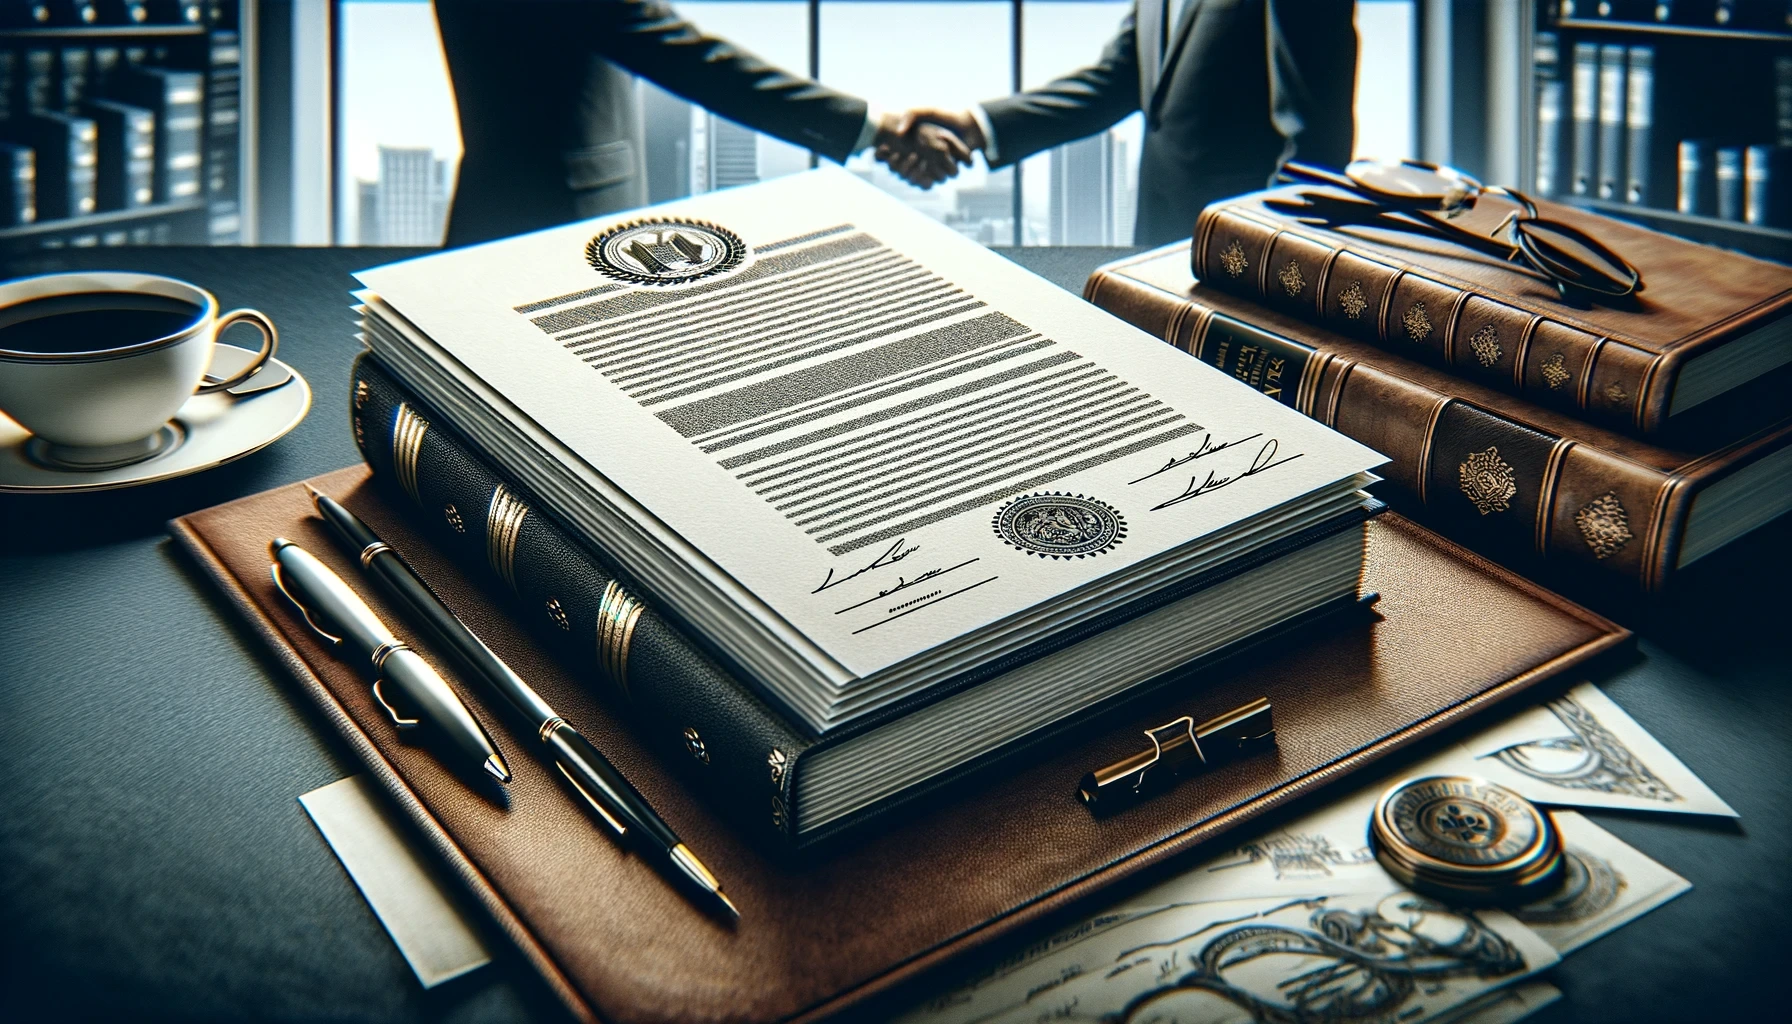 Stack of legal papers, firm seal, pen, glasses on journal, blurred handshake background, depicting business legality.